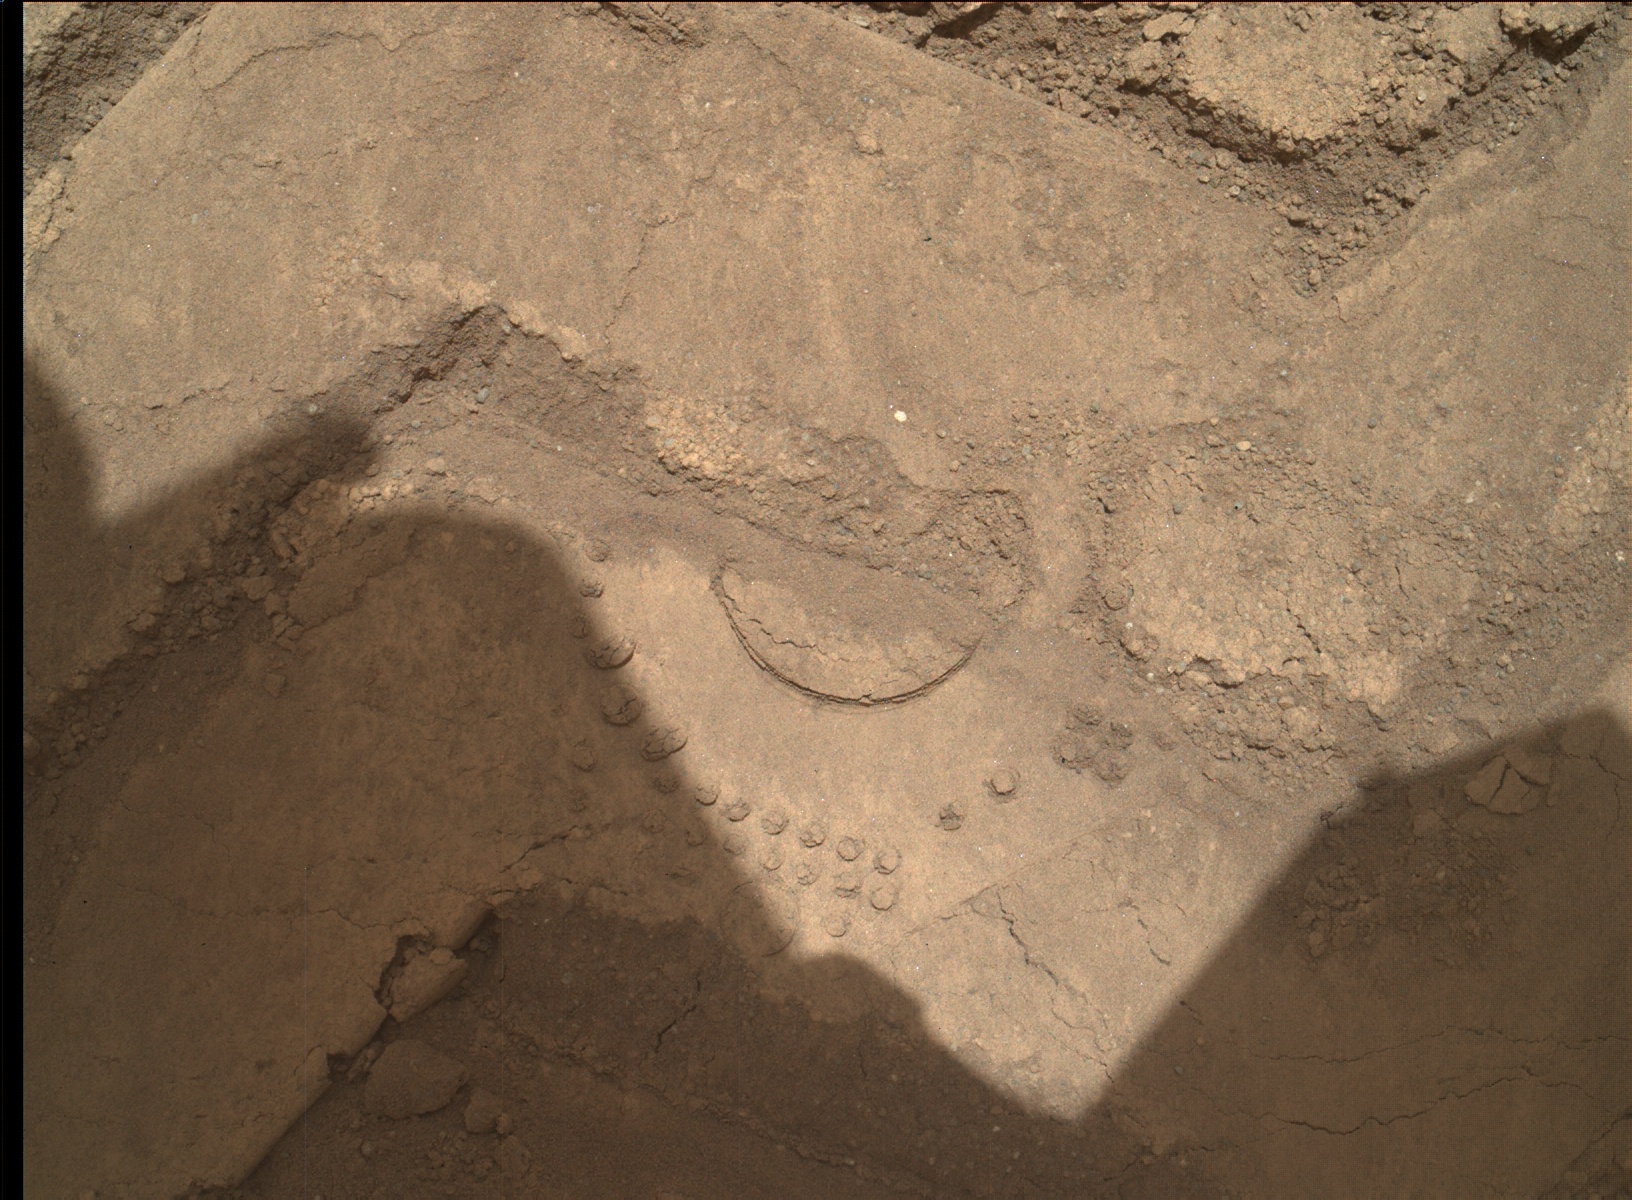 Nasa's Mars rover Curiosity acquired this image using its Mars Hand Lens Imager (MAHLI) on Sol 89